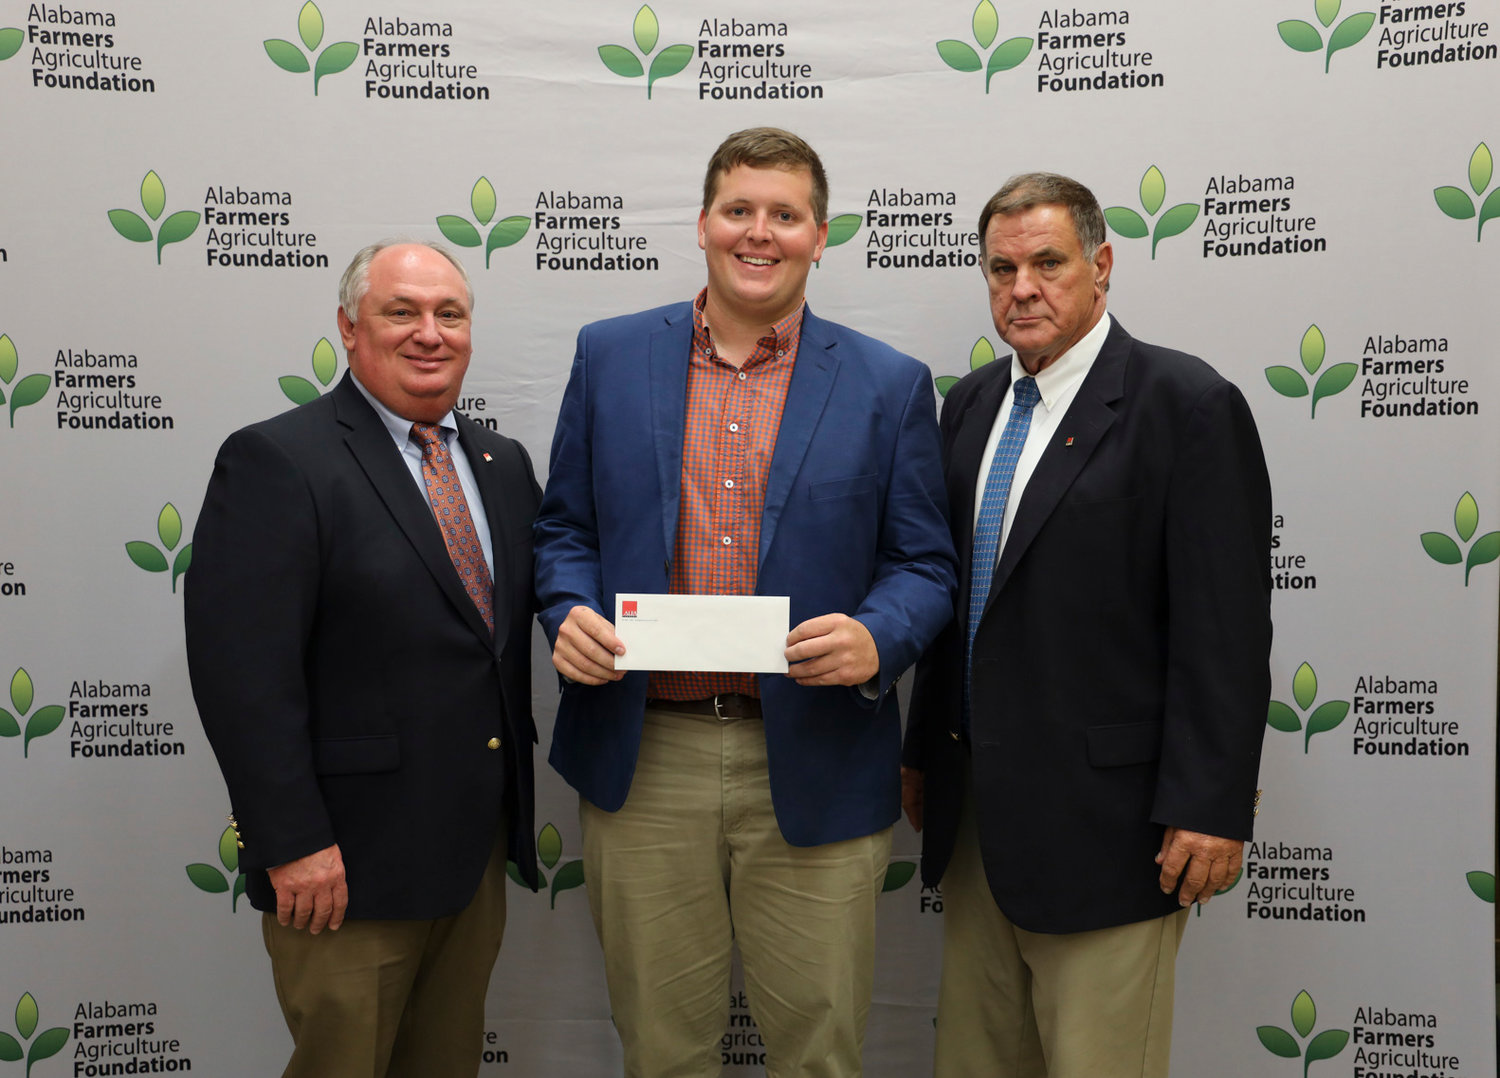 Baldwin County native and Auburn University student Garrett Springs received a $1,750 scholarship from the Alabama Farmers Federation Agriculture Foundation and the Baldwin County Farmers Federation. He was recognized during the Alabama Farmers Federation scholarship reception Sept. 26 at Lazenby Farms in Auburn. Springs is a senior studying agricultural science. From left are Federation President Jimmy Parnell, Springs and Federation Southwest Area Vice President Jake Harper.